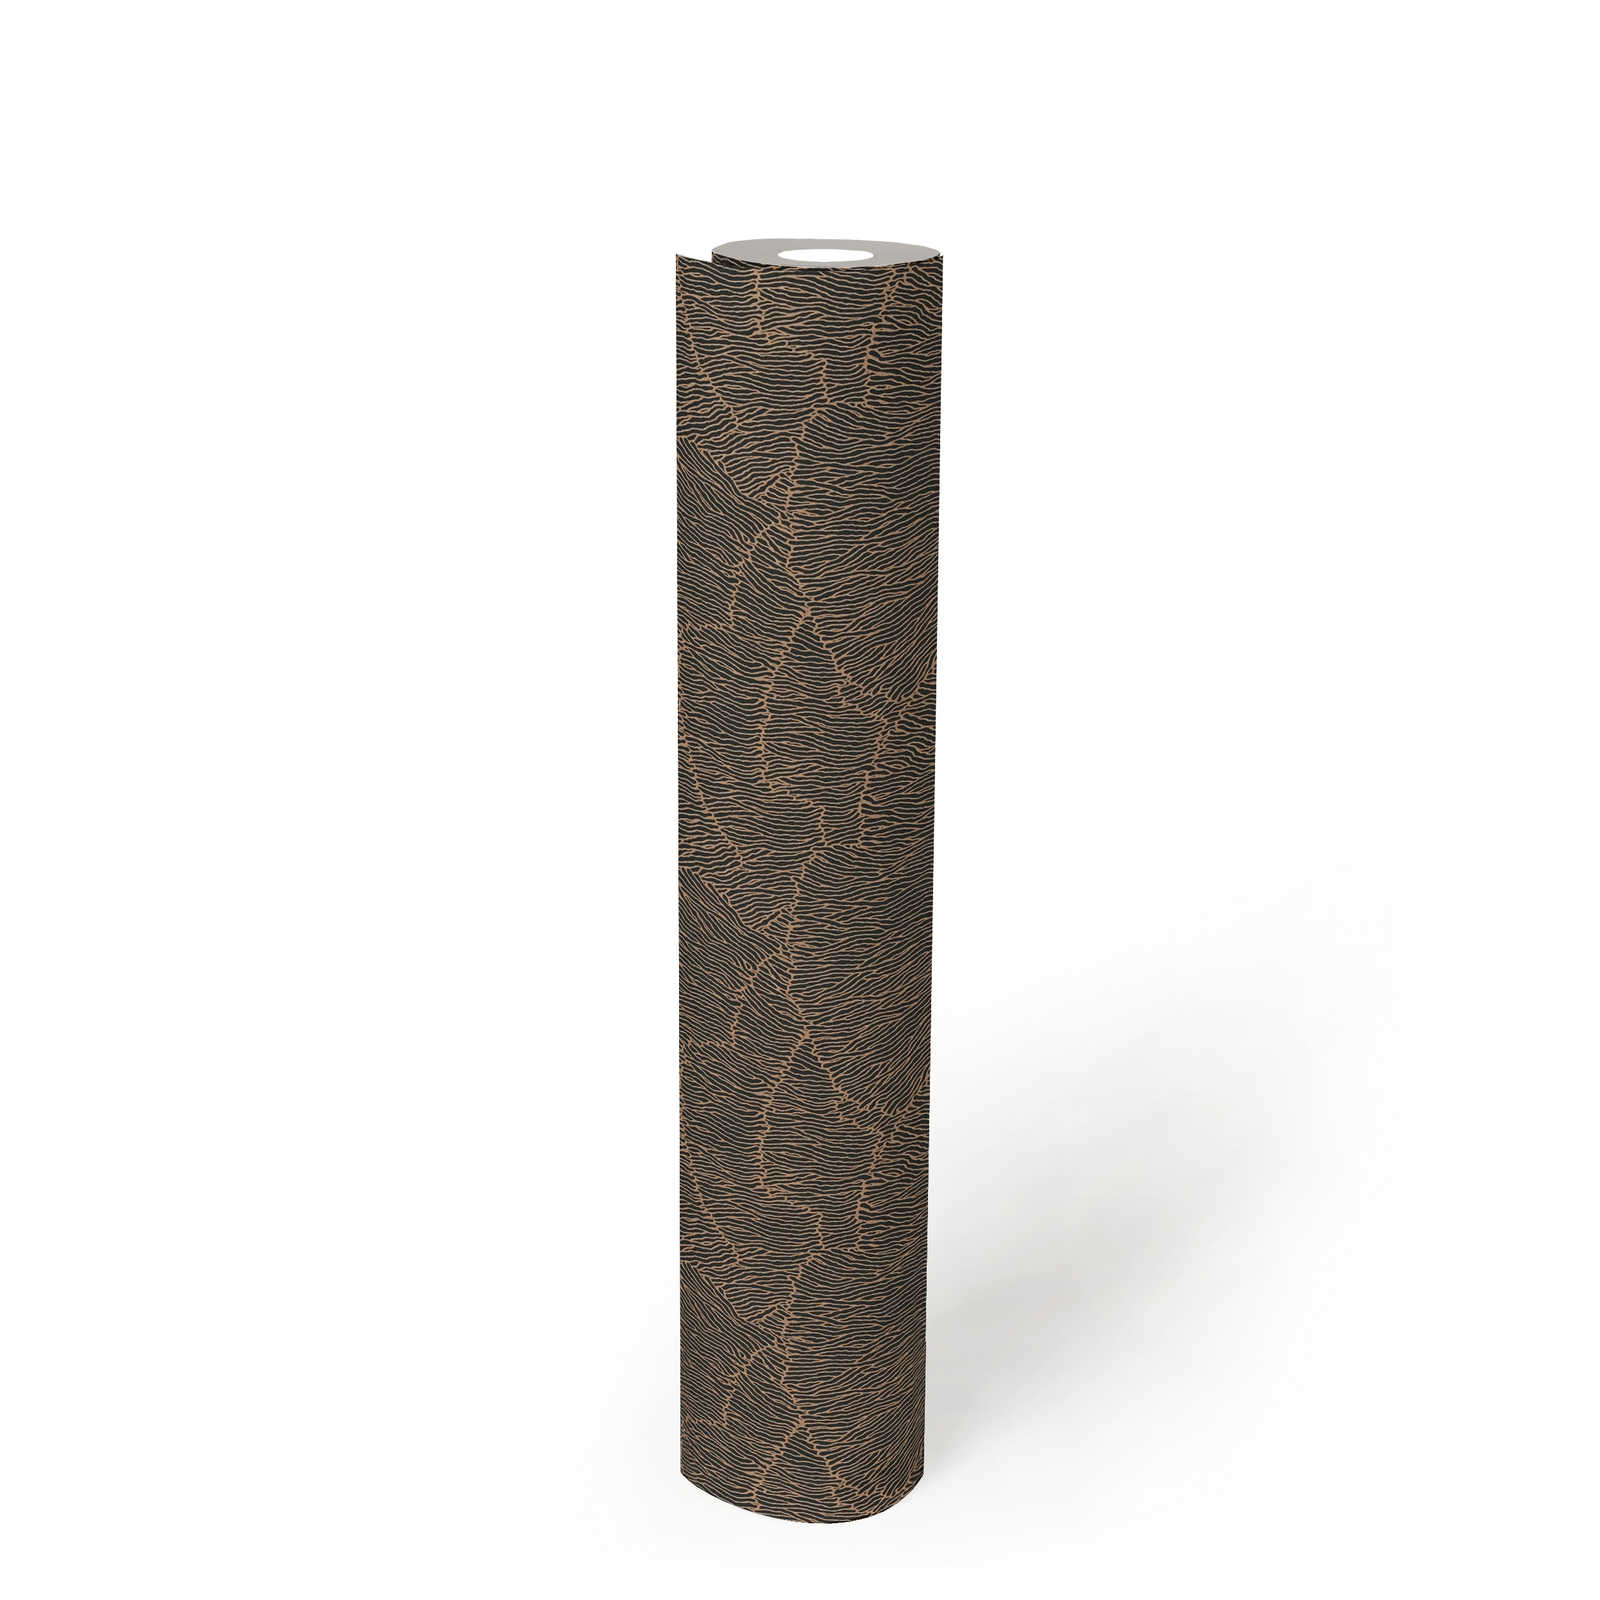             Non-woven wallpaper with line pattern - black, gold, metallic
        